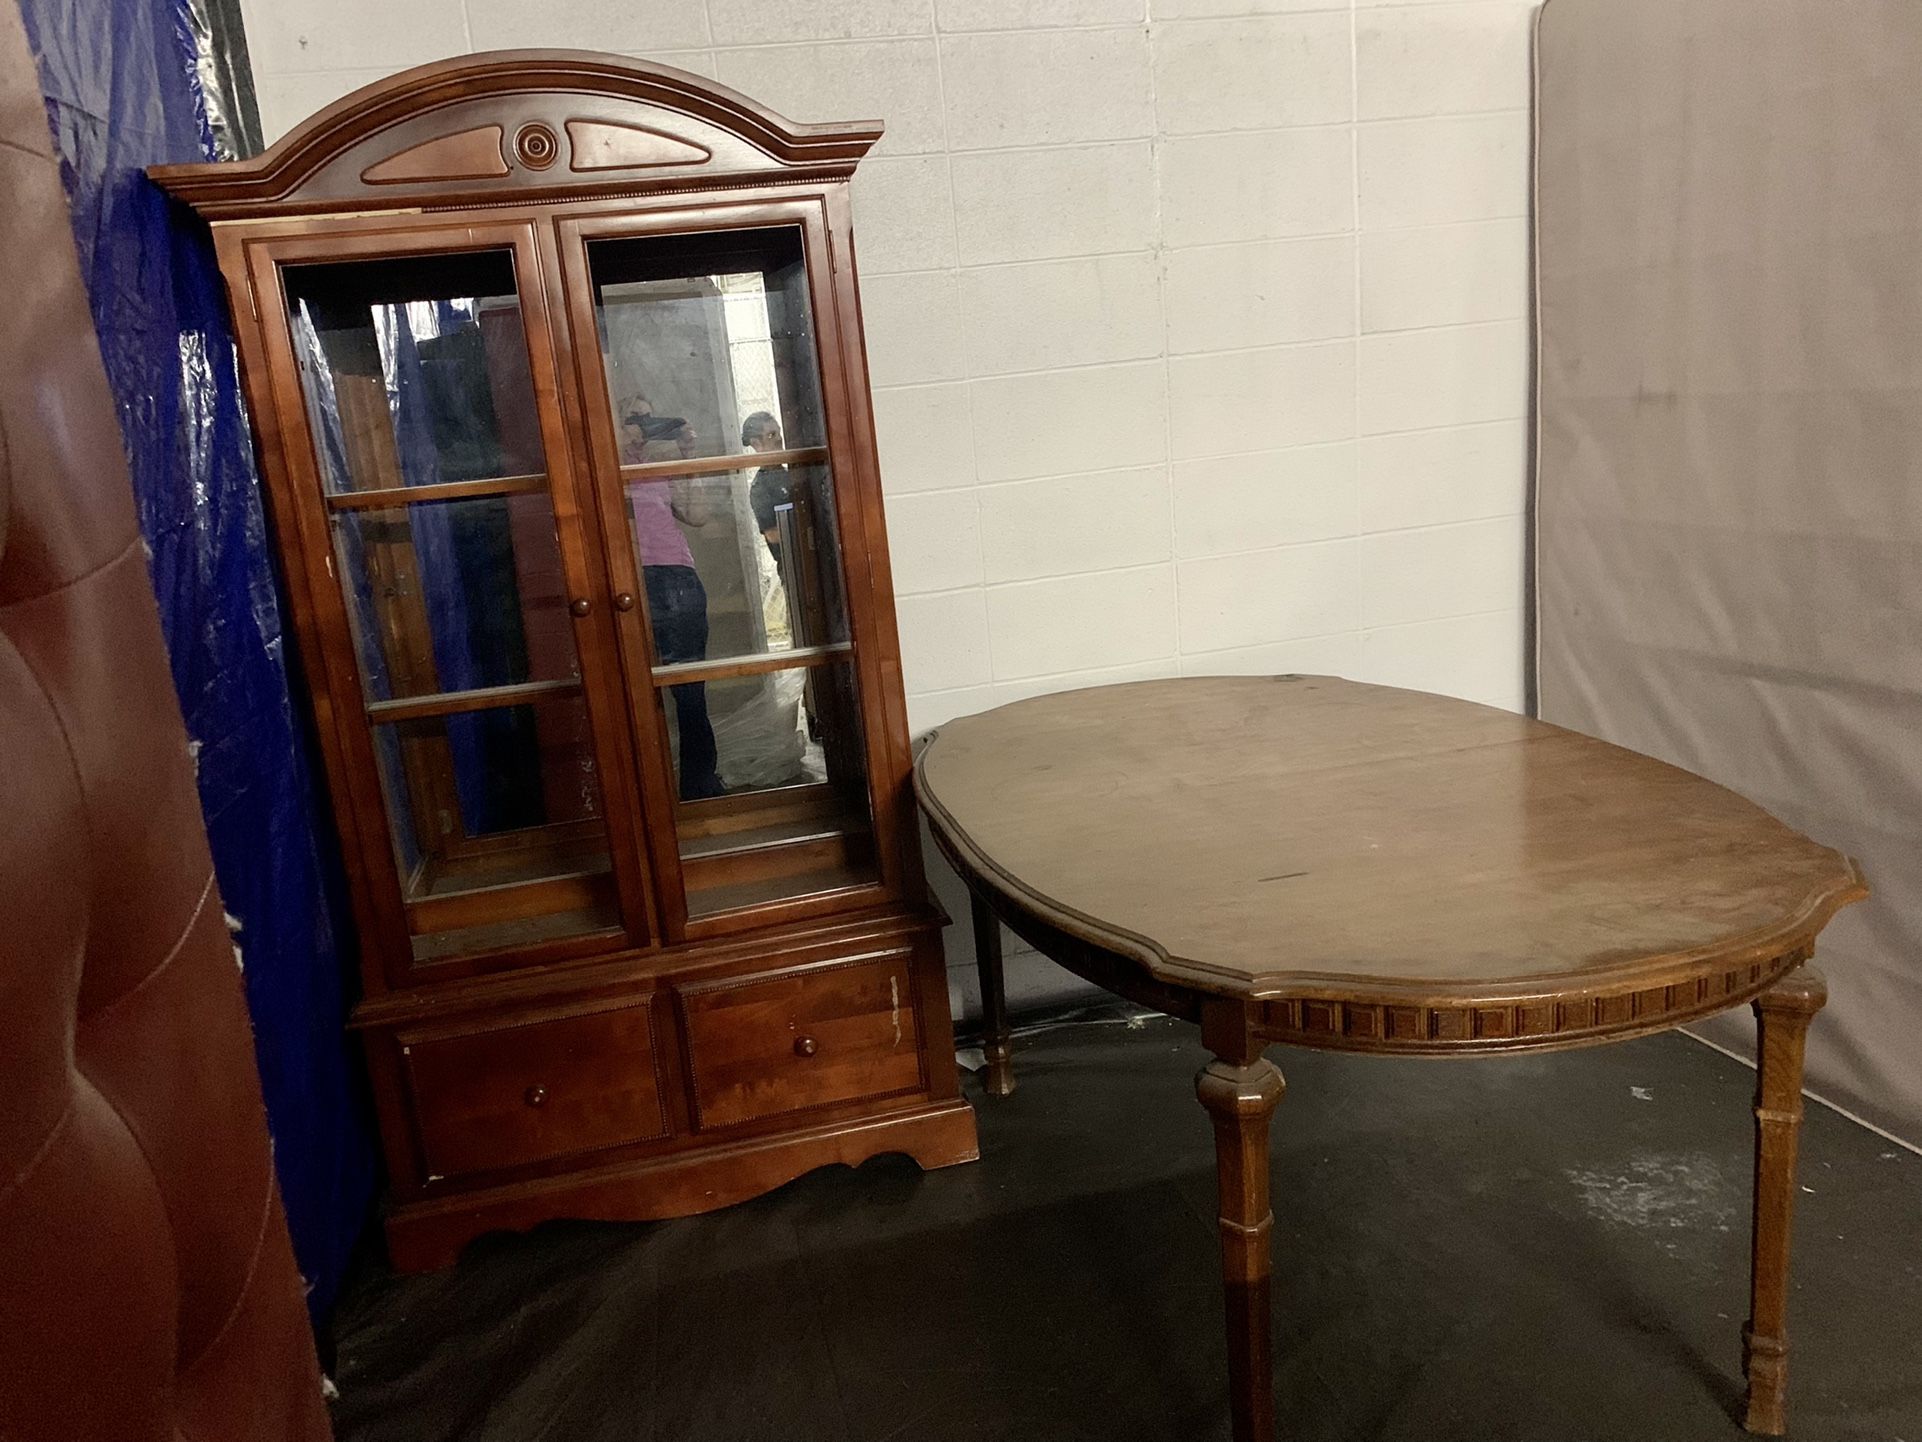 Antique 1950s dining table must go this week. Comes with table leaf